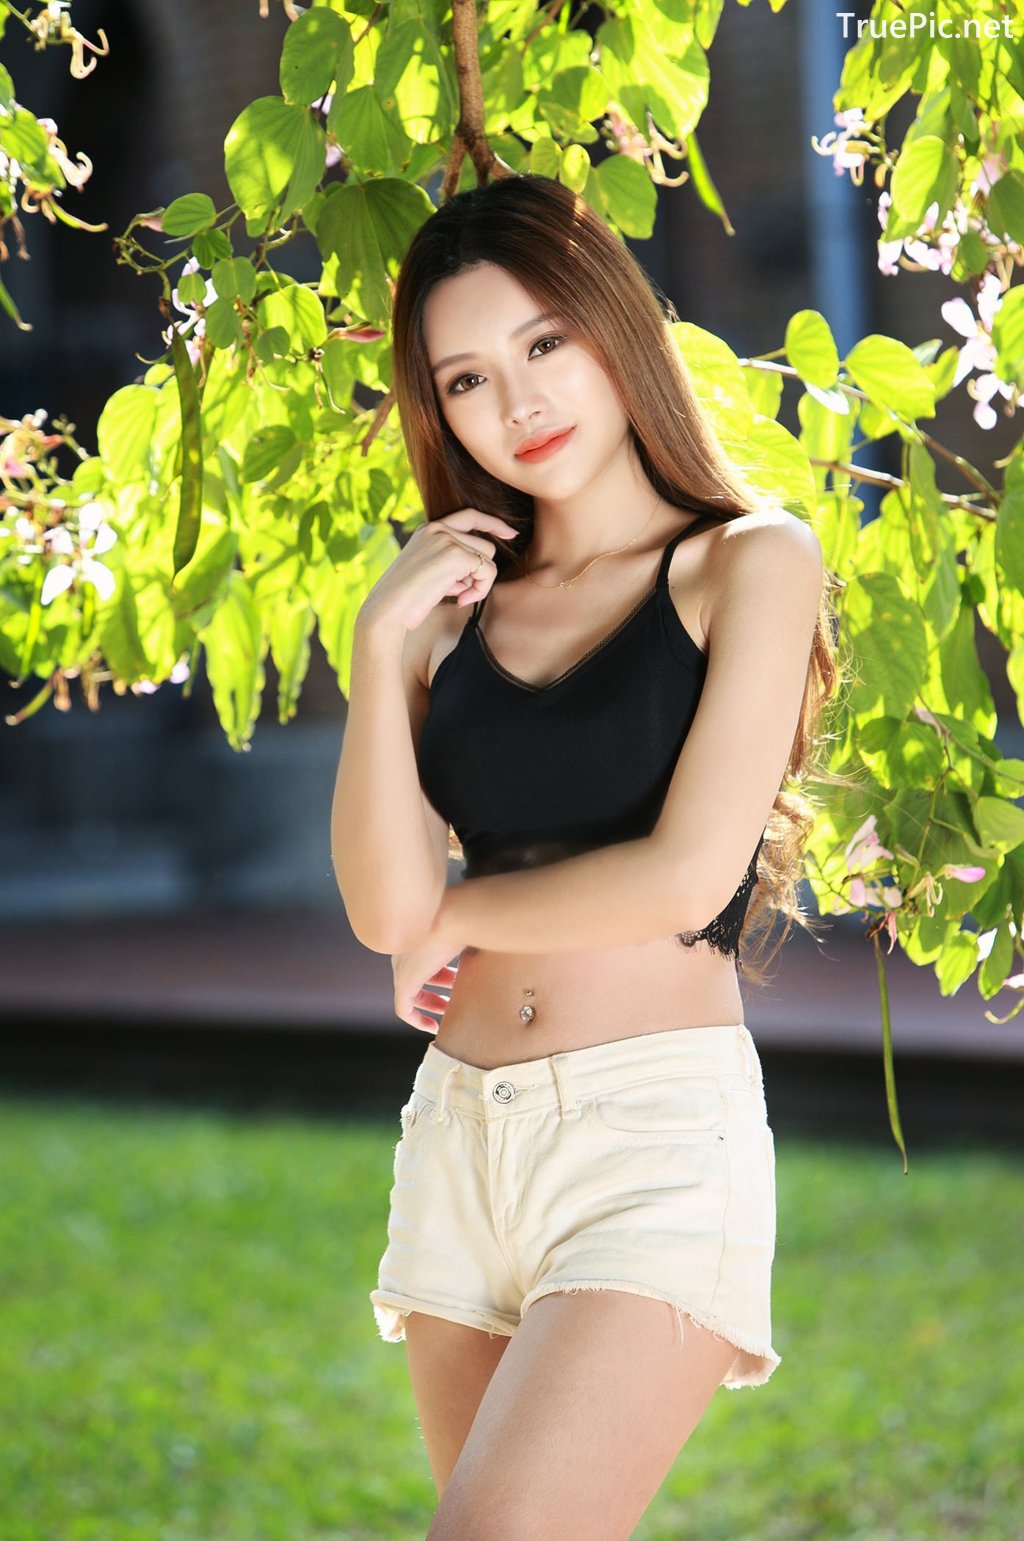 Image-Taiwanese-Model–莊舒潔–Hot-White-Short-Pants-and-Black-Crop-Top-TruePic.net- Picture-52